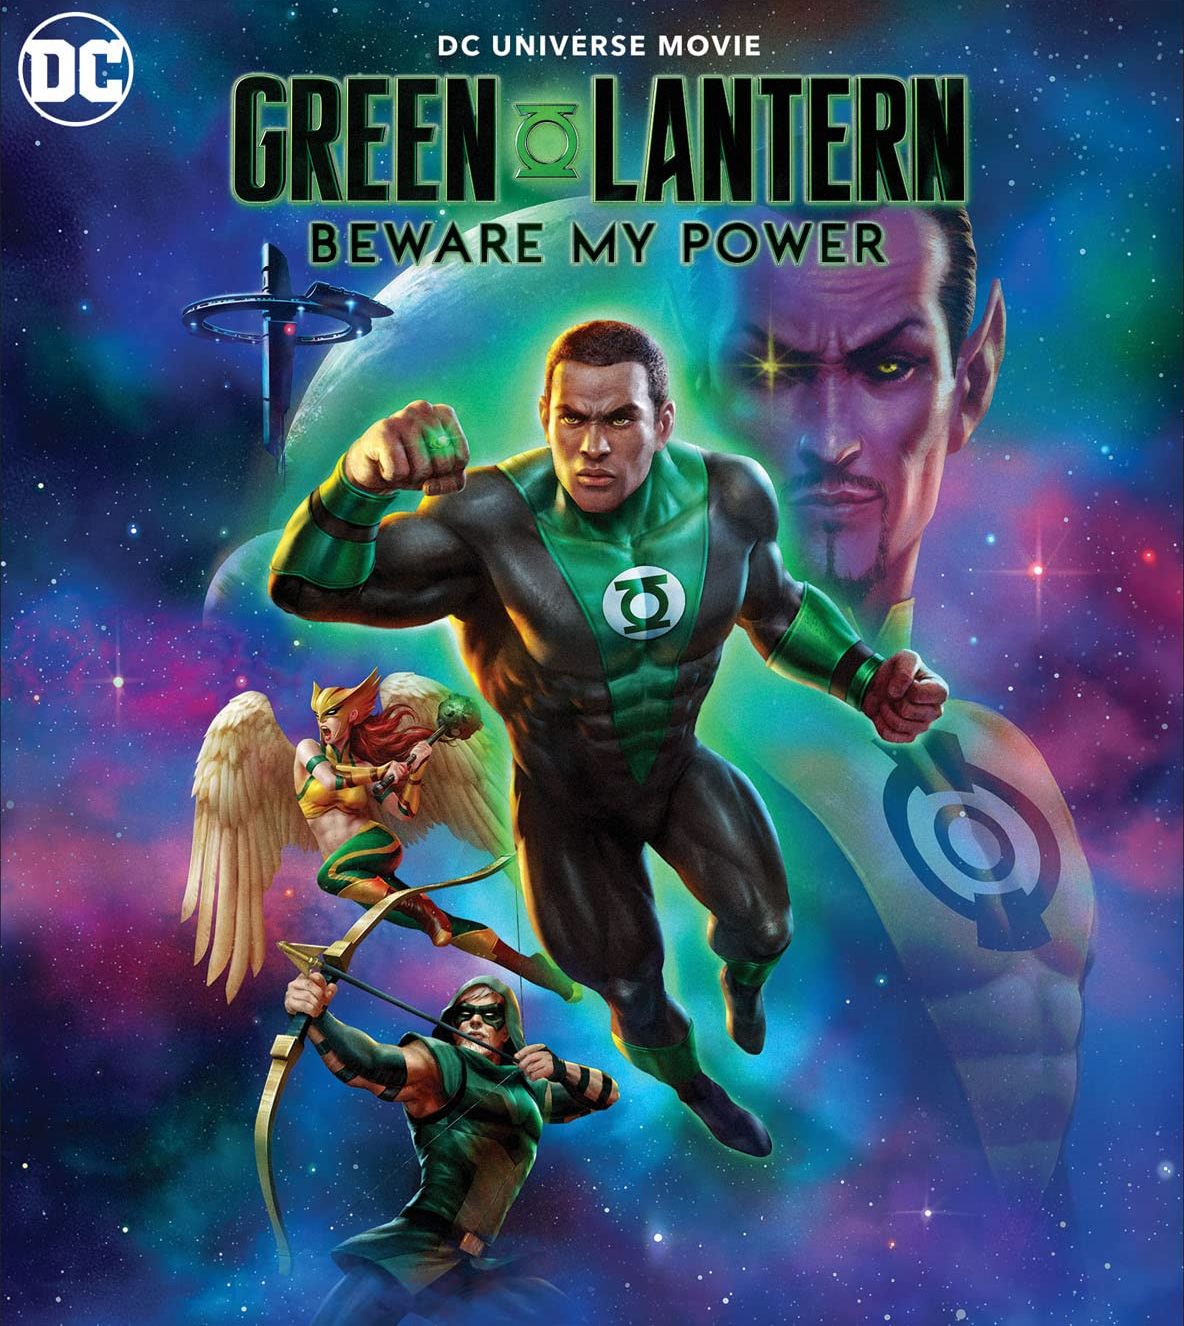 https://static.wikia.nocookie.net/marvel_dc/images/a/ae/Green_Lantern_Beware_My_Power.jpg/revision/latest?cb=20220525141458